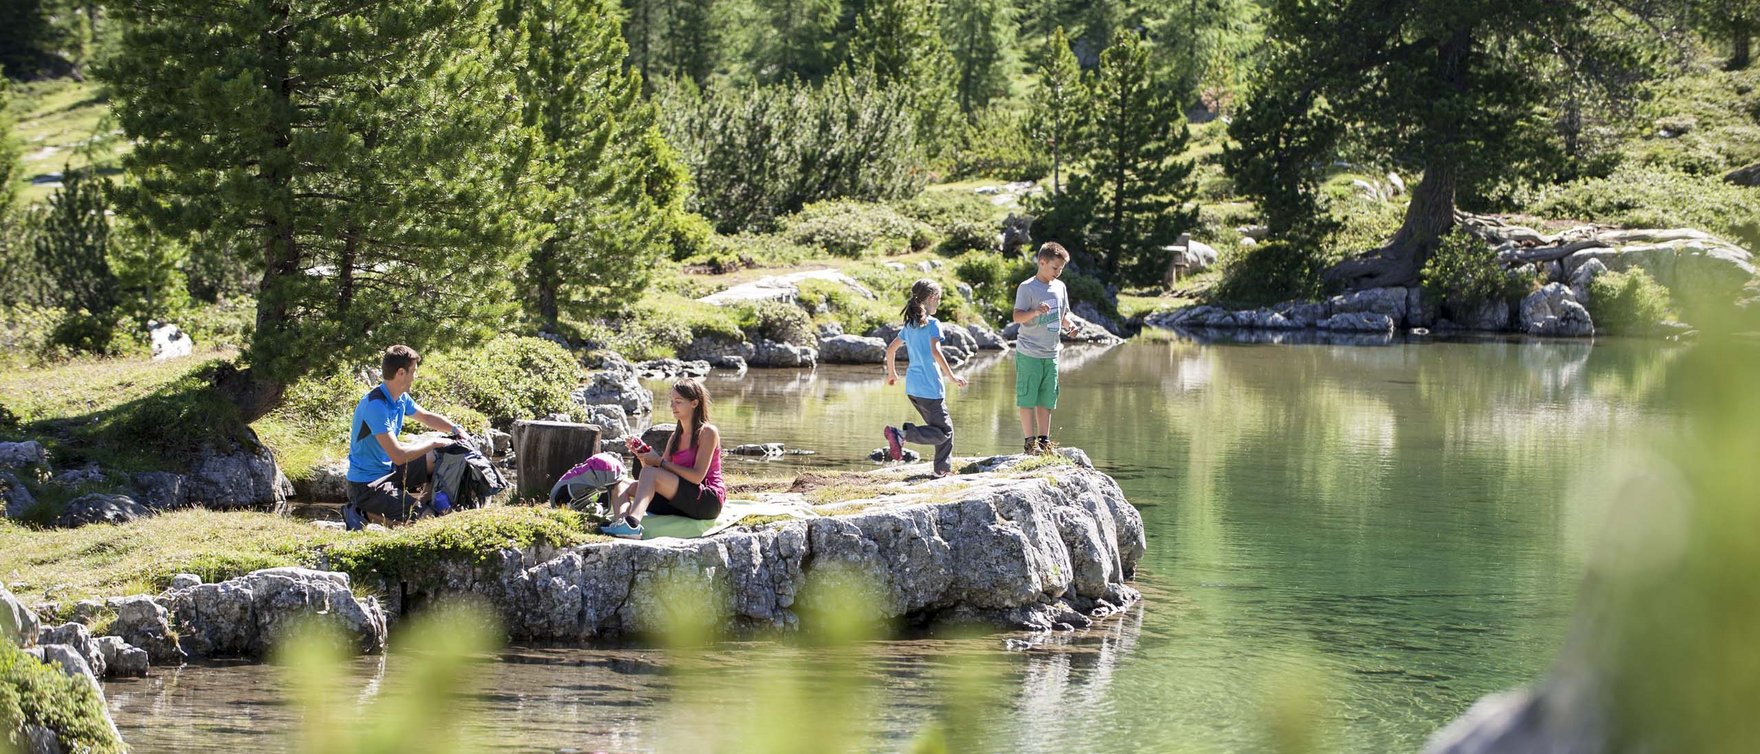 Discover Val Pusteria/Pustertal with children